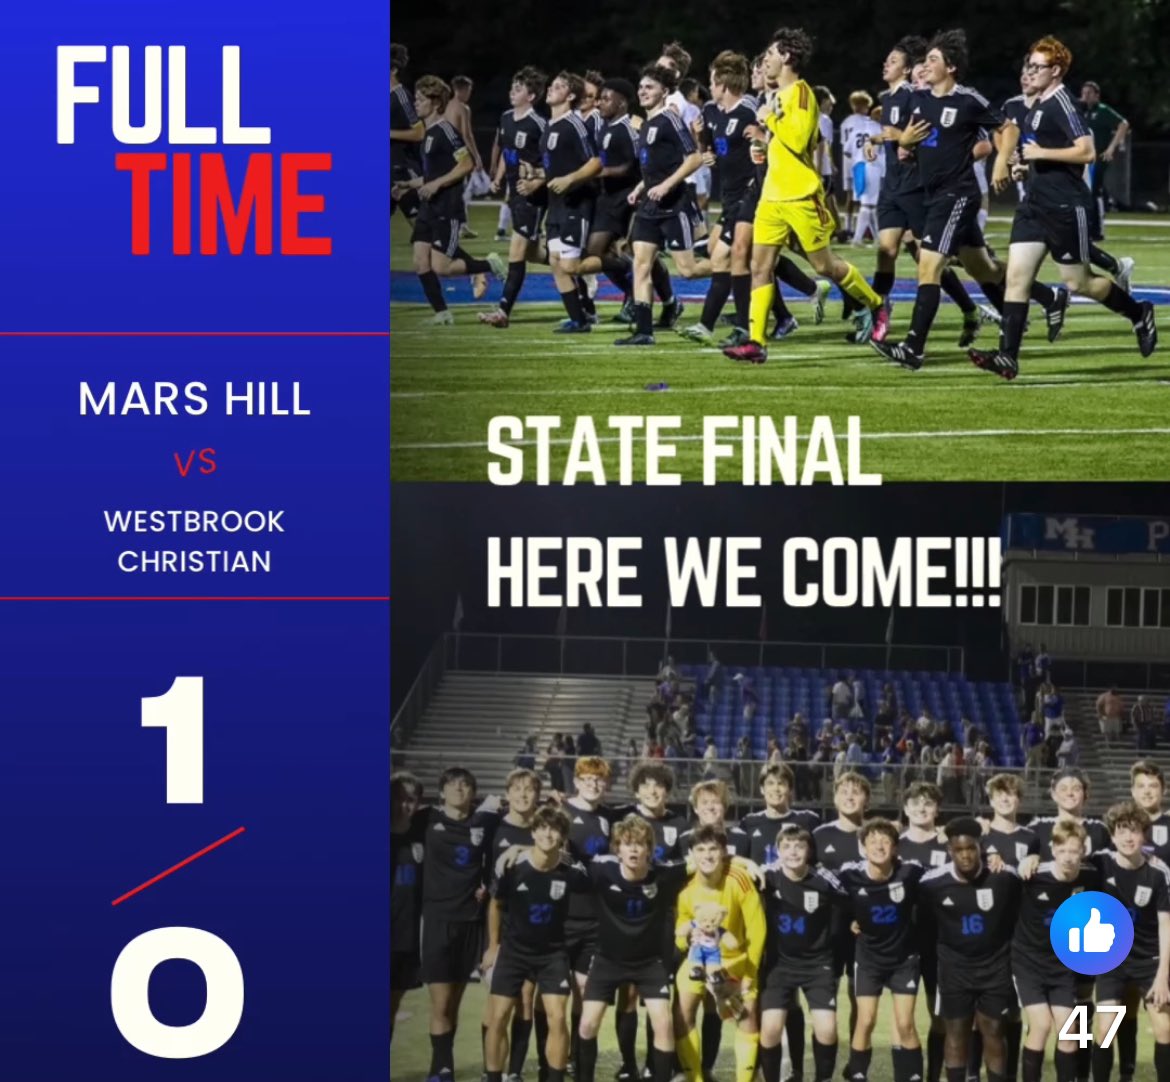 A goal by Jesse Parker assisted by Dawson Derr to put us in to the State Final!!!